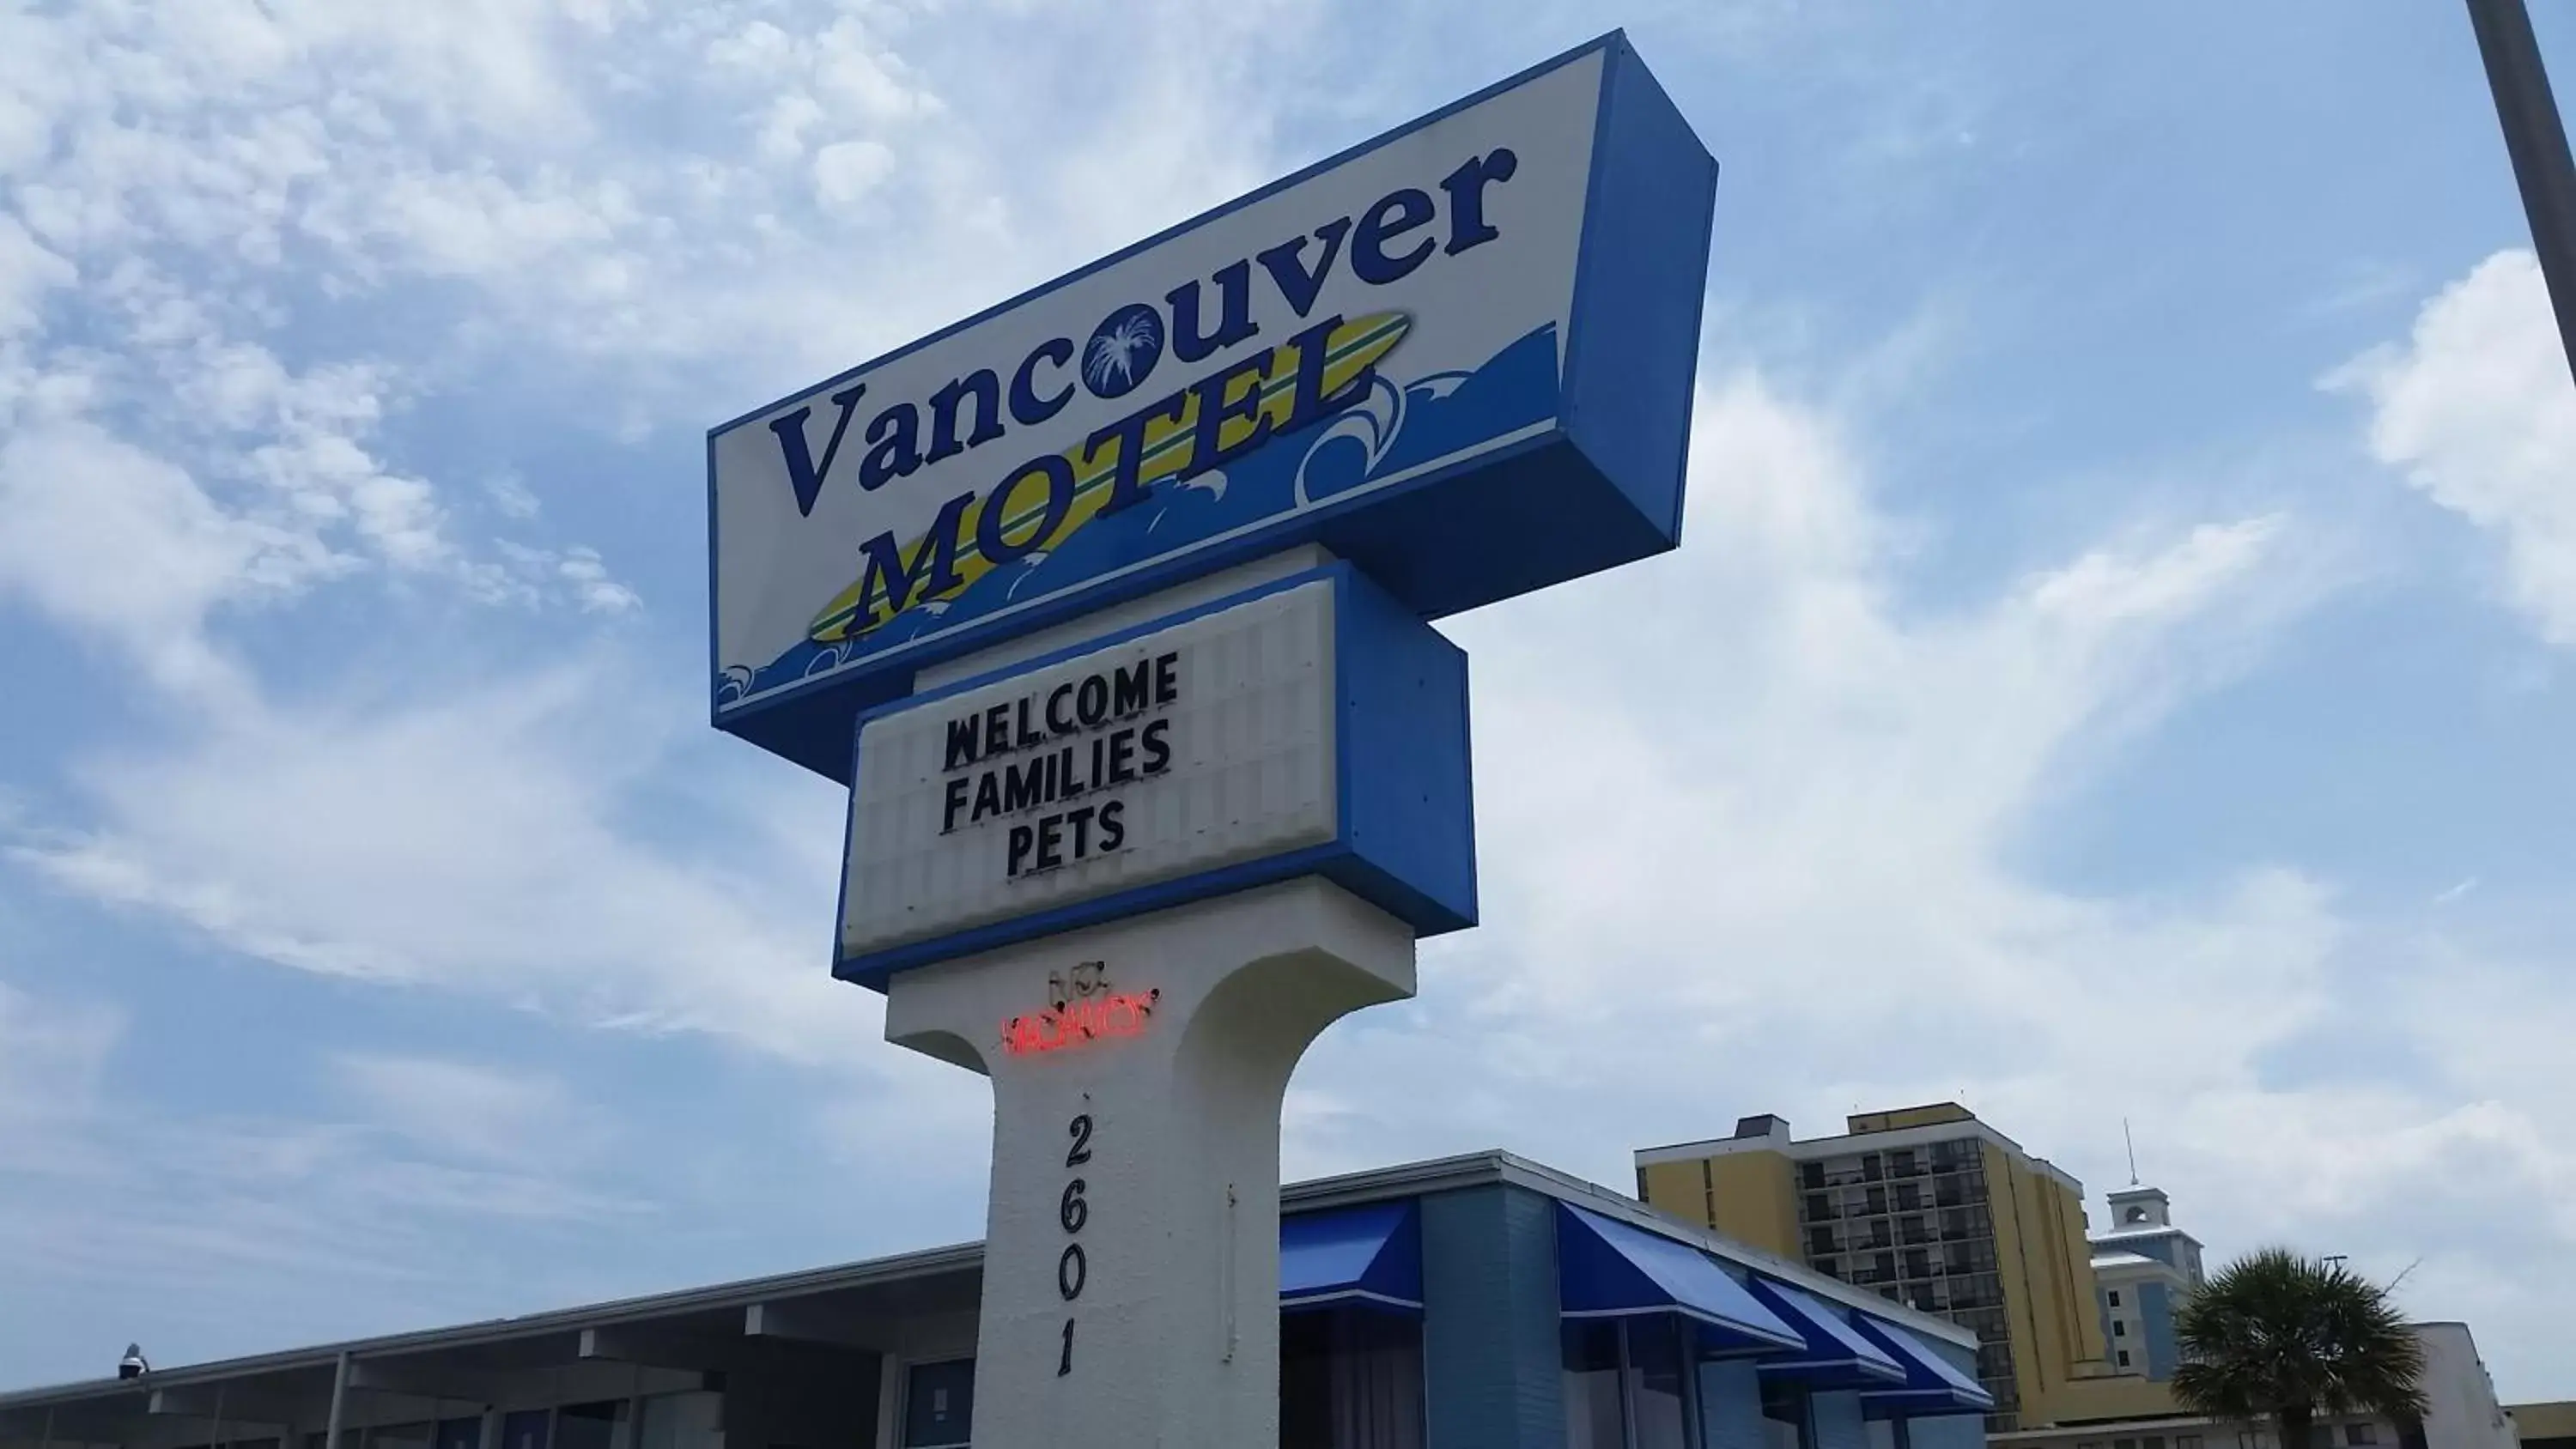 Property logo or sign in Vancouver Motel